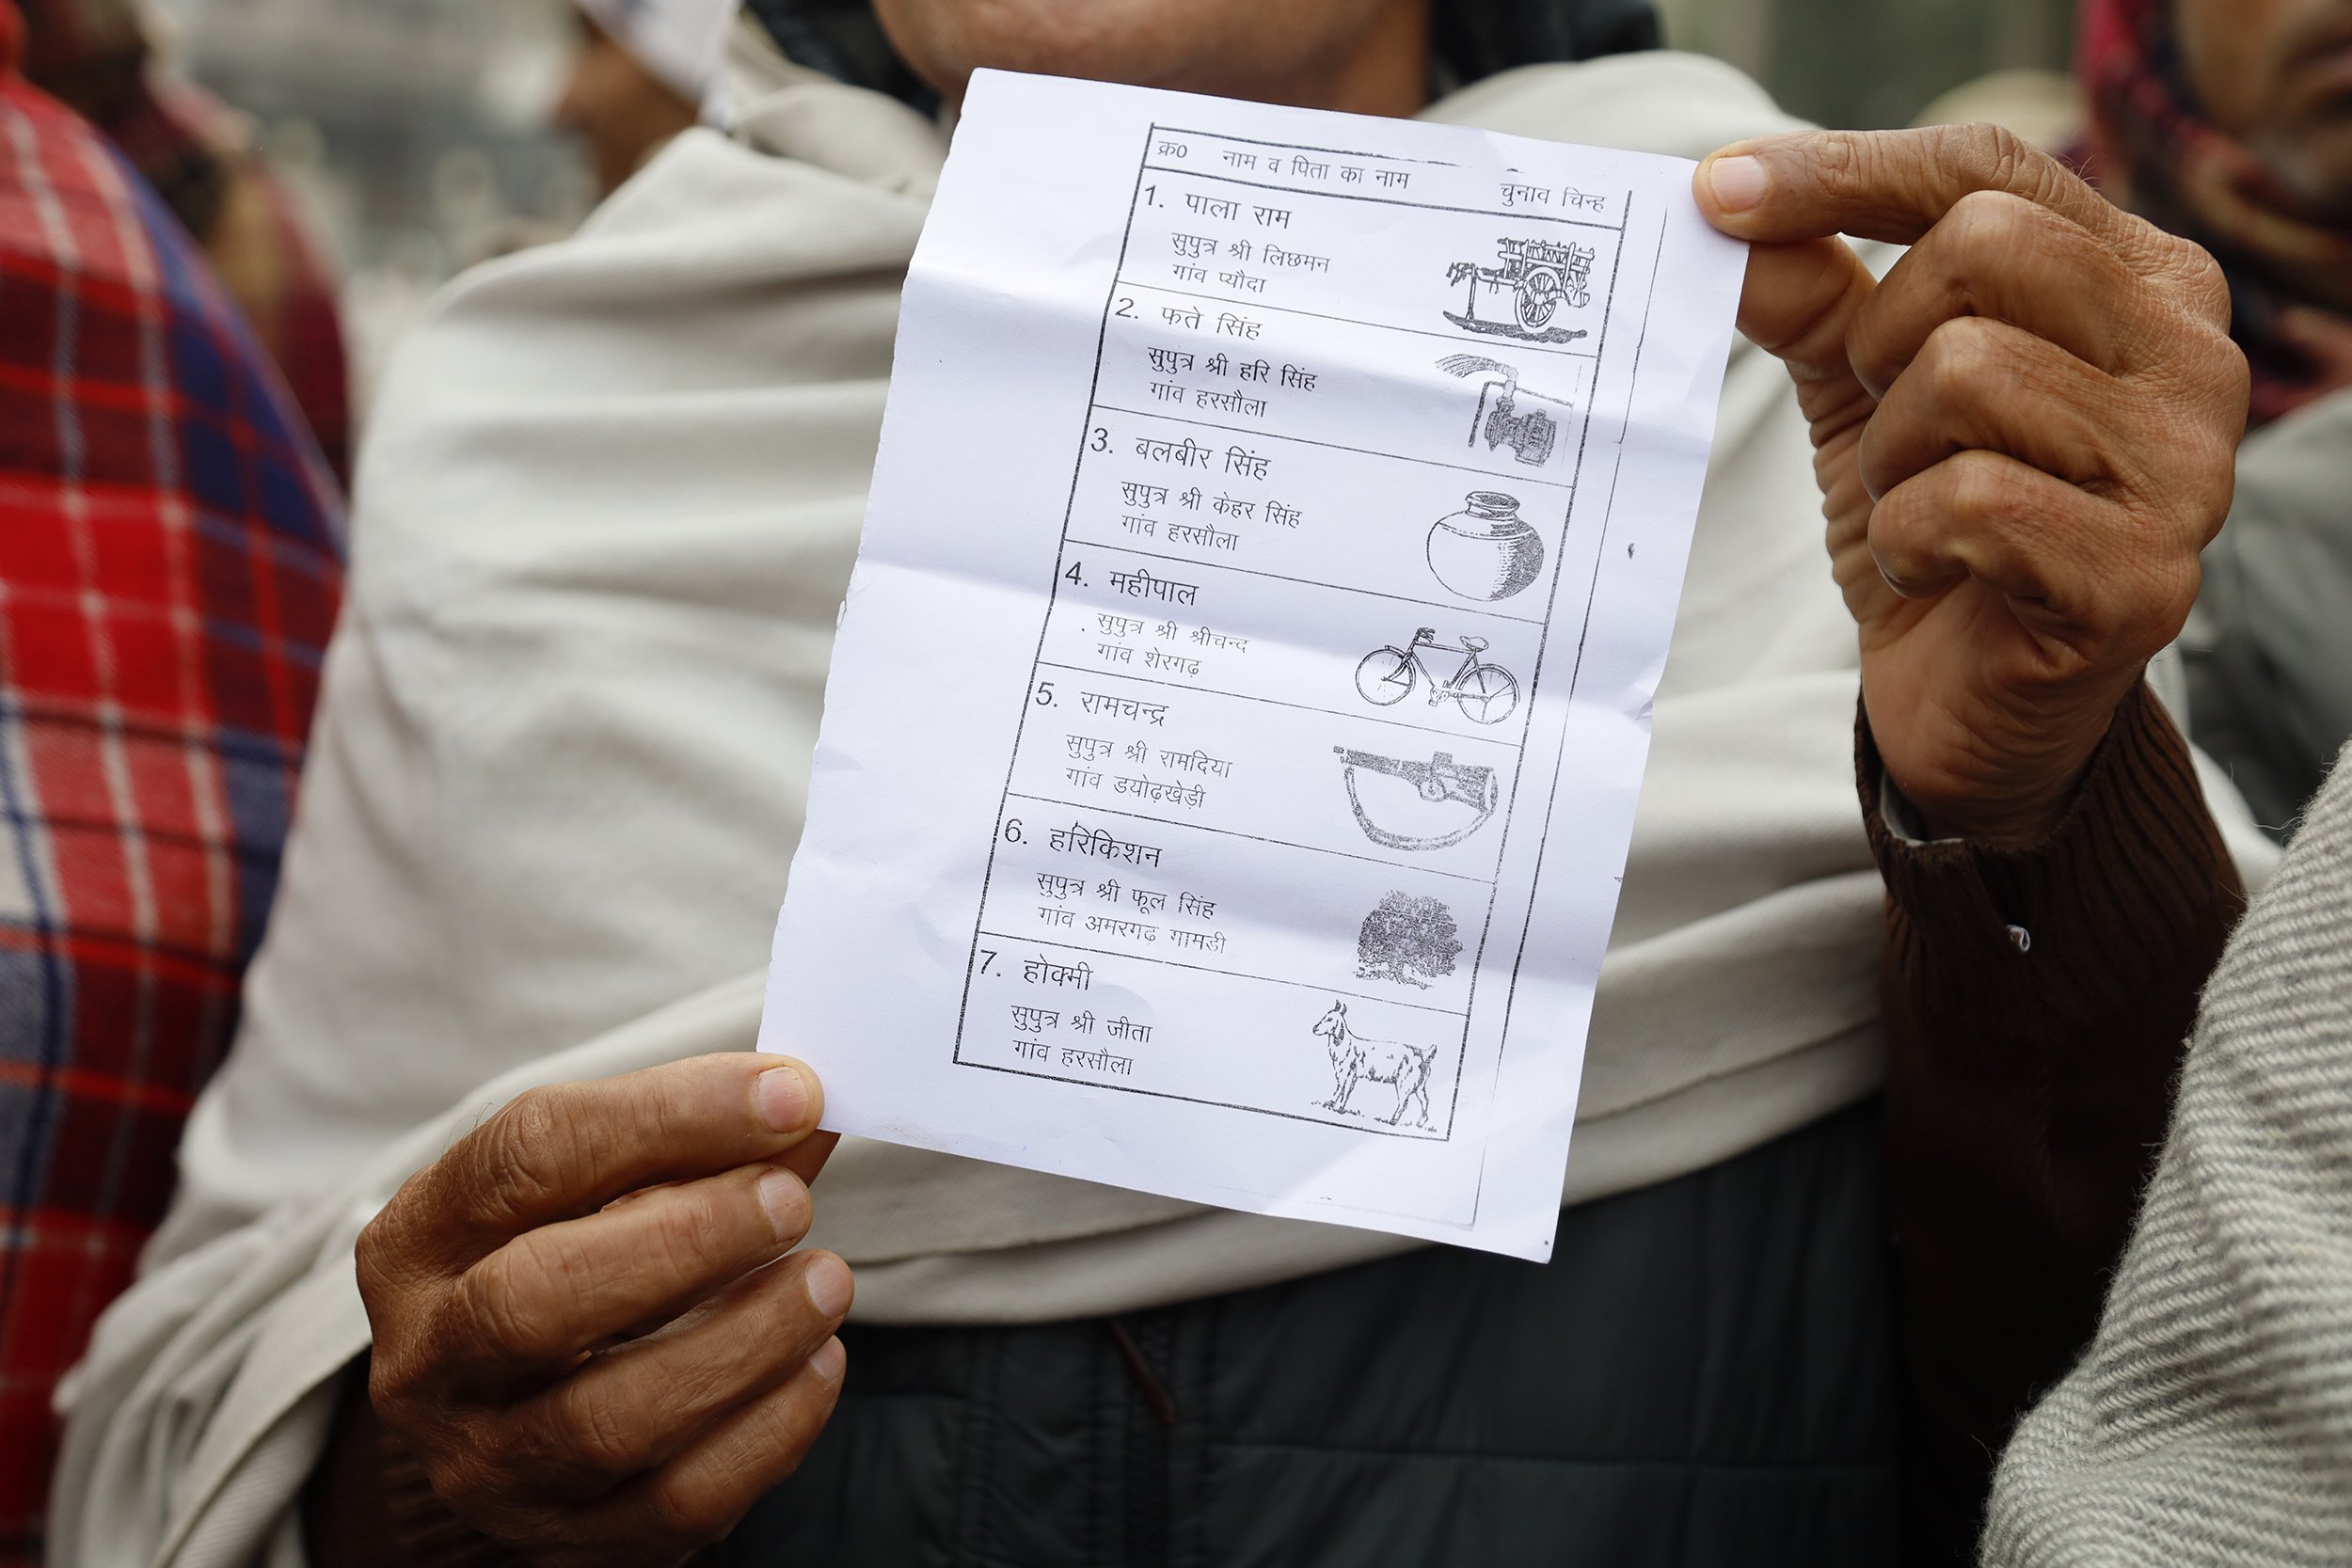  Hukmi Dhull holds up a ballot listing the names of farmers’ union candidates. | Photo by Sarah Bakeman 